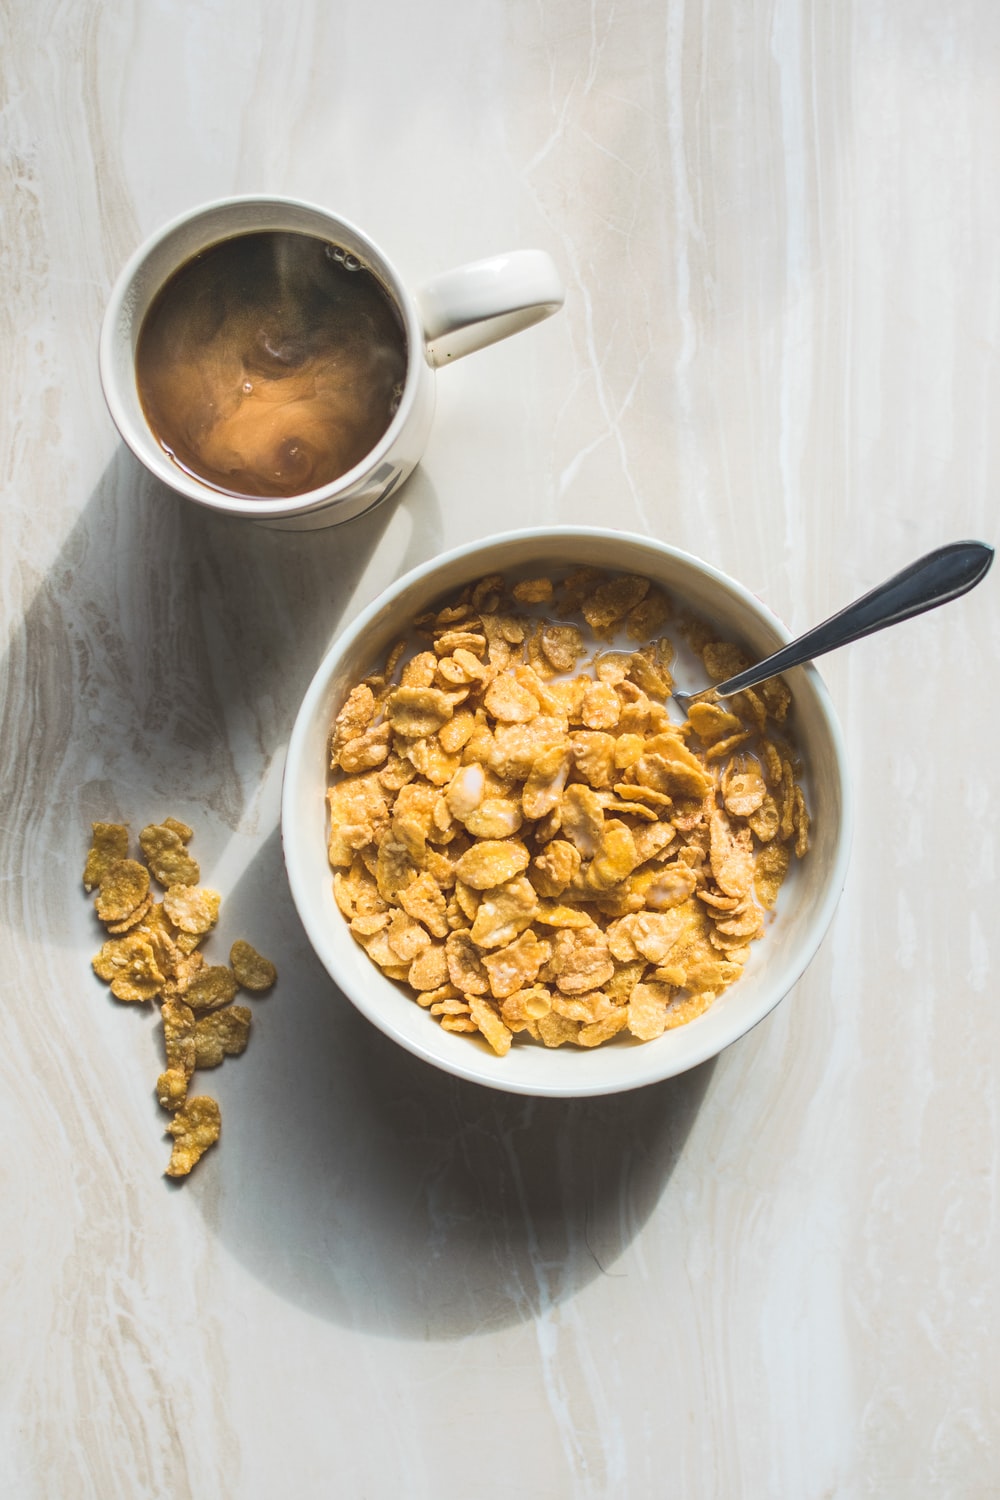 ceramic bowl filled with cereals and spoon photo